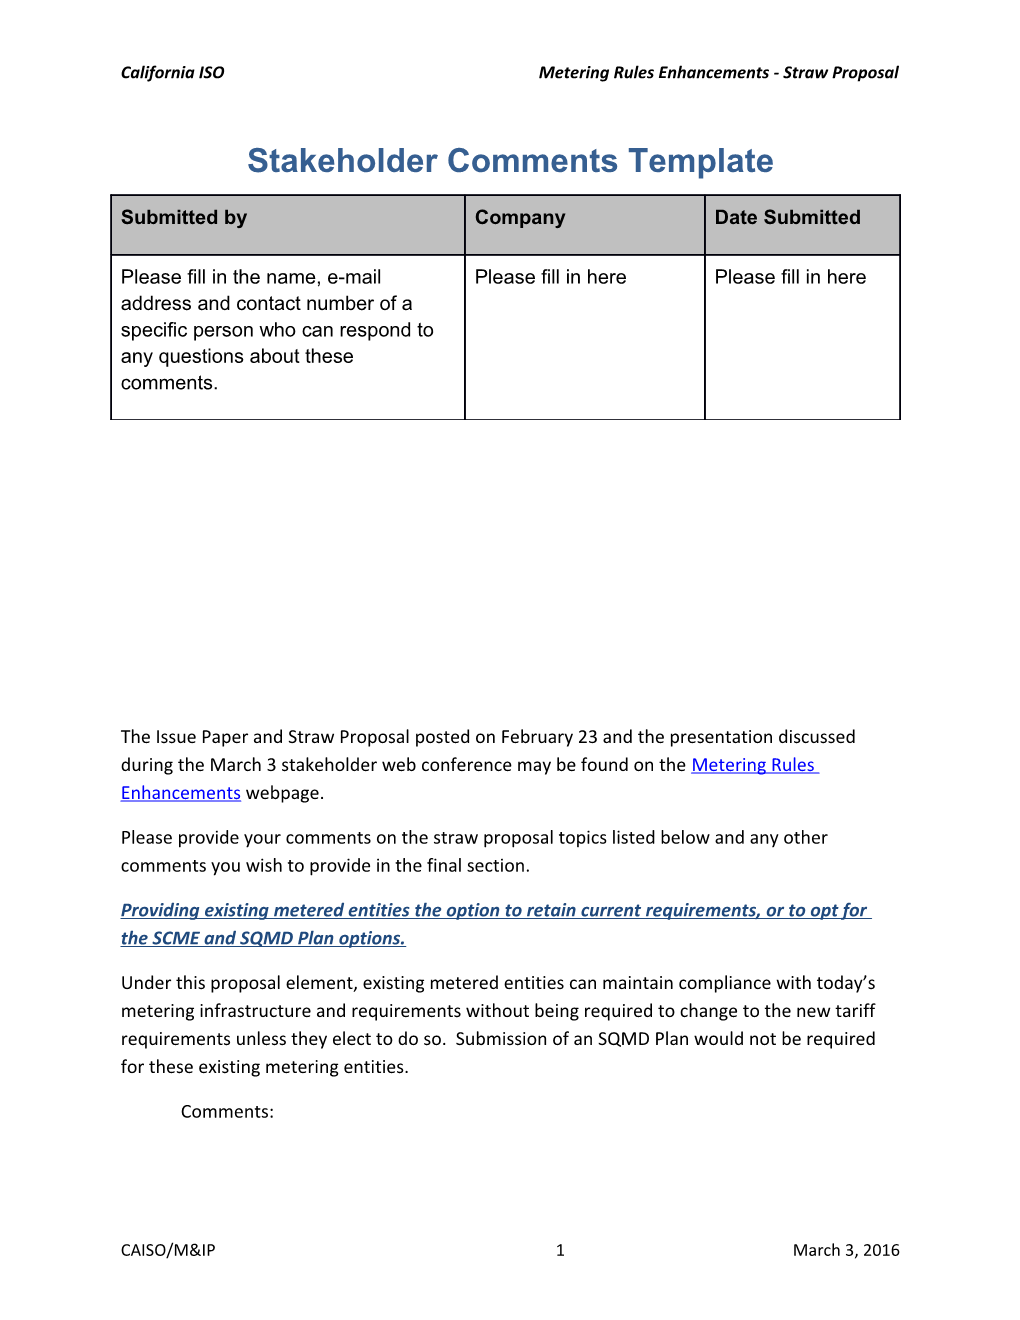 Stakeholder Comments Template - Metering Rules Enhancements Issue Paper and Straw Proposal